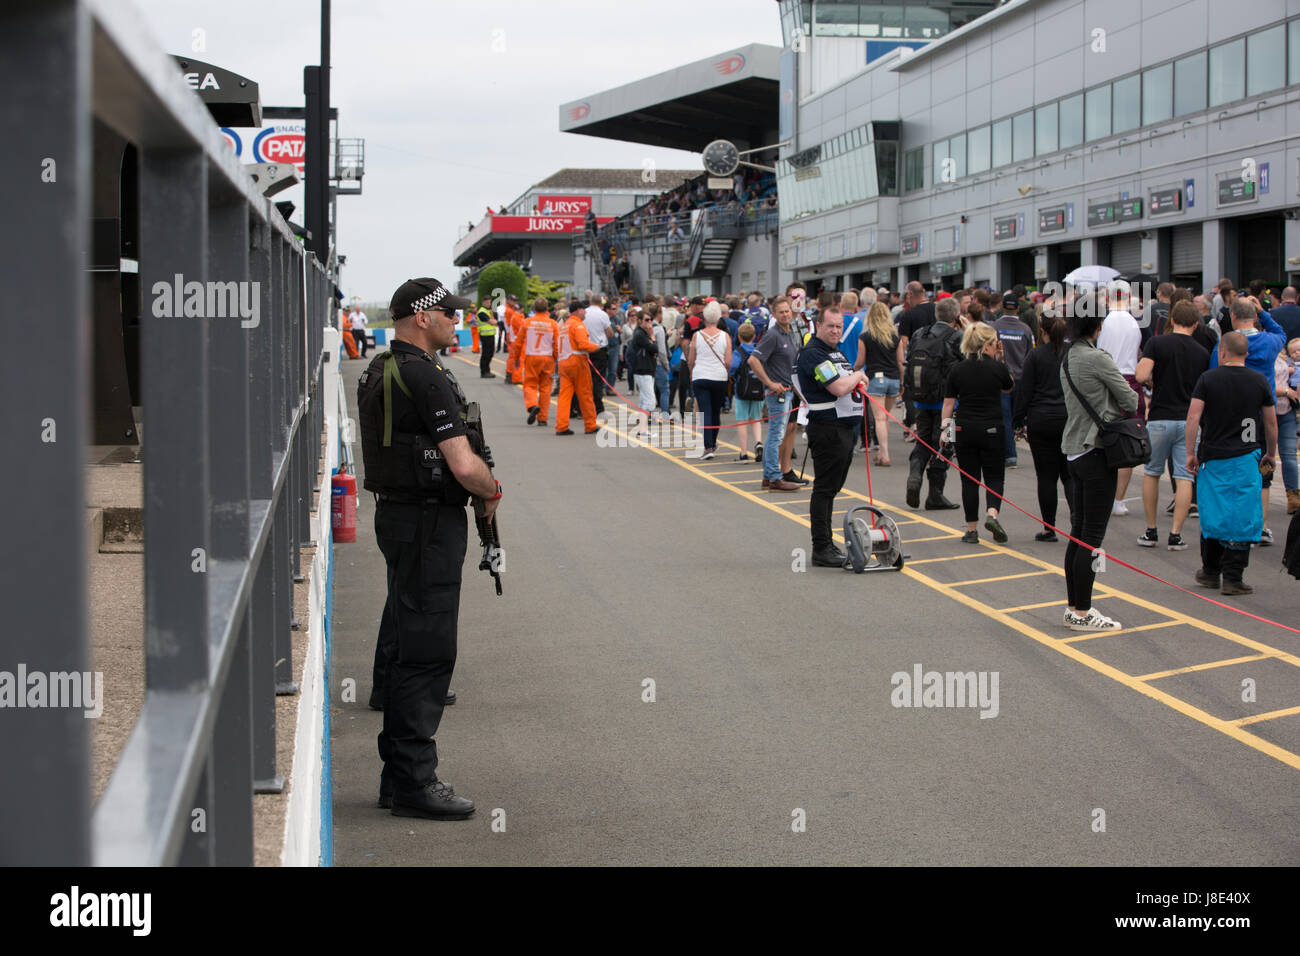 Donington Park, UK. 28th May, 2017. Armed police patrolling the pit lane after terror attacks in Manchester UK Credit: steven roe/Alamy Live News Stock Photo